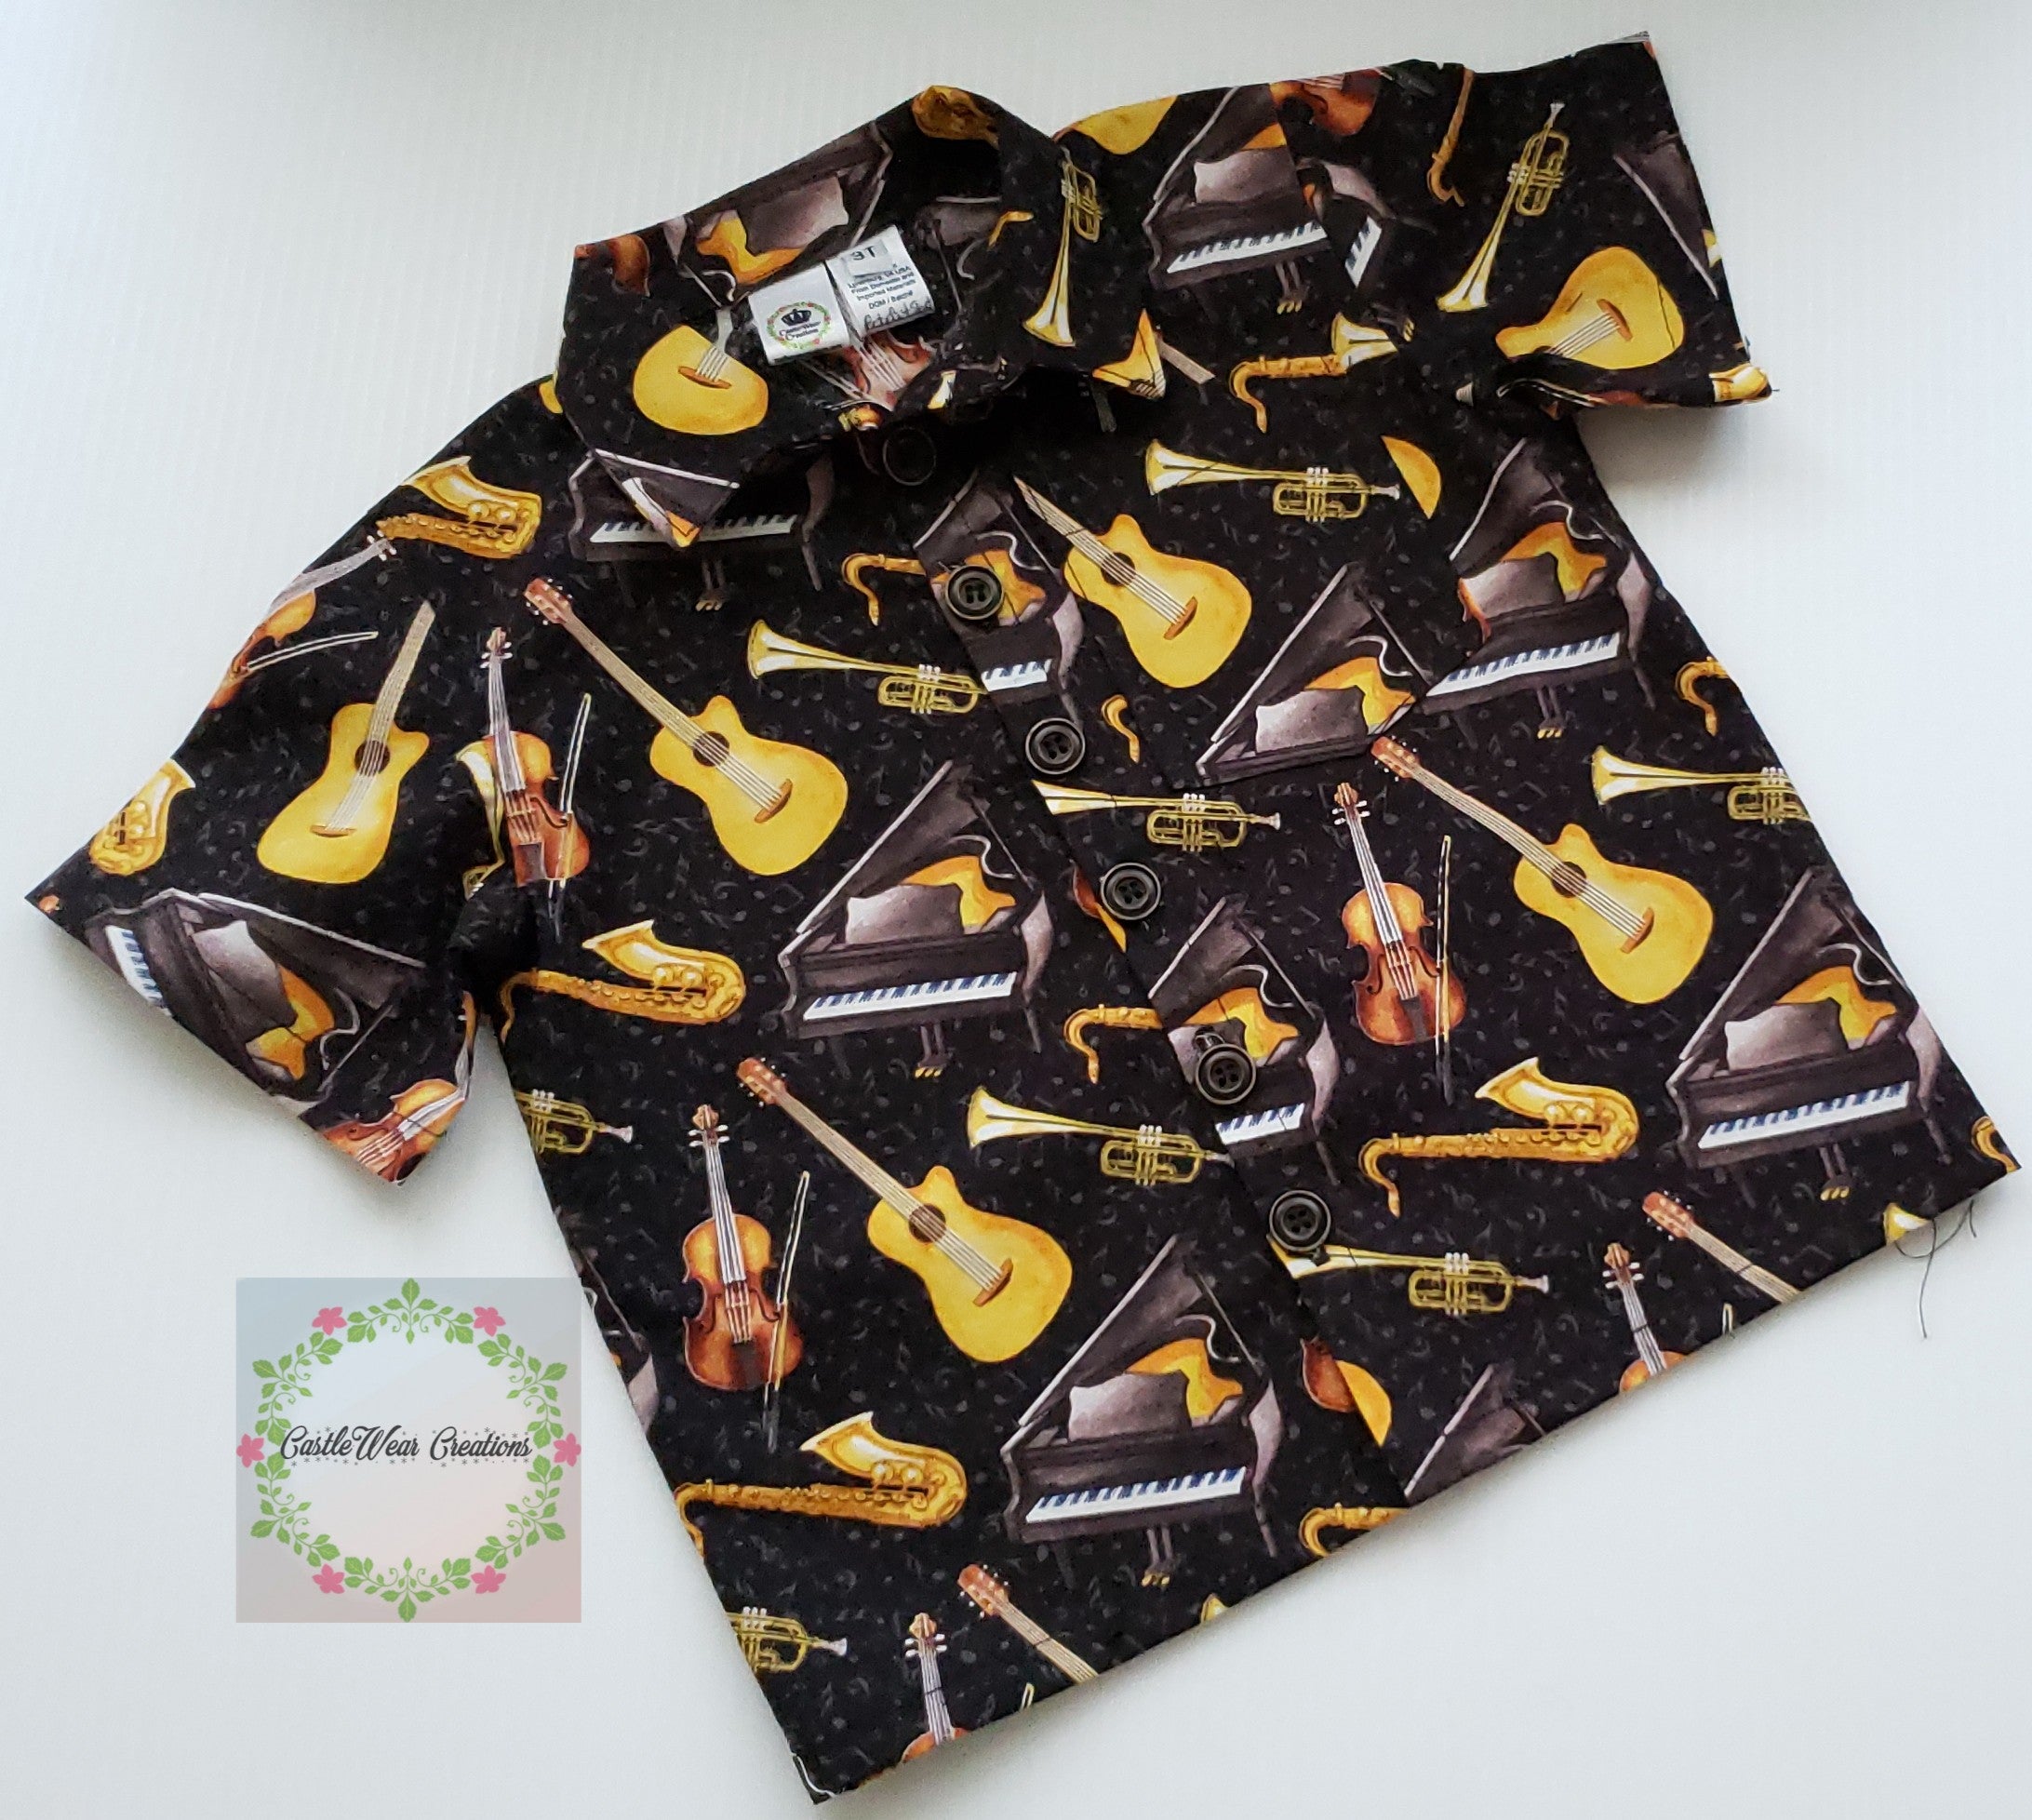 For the Love of Music Button Up Shirt